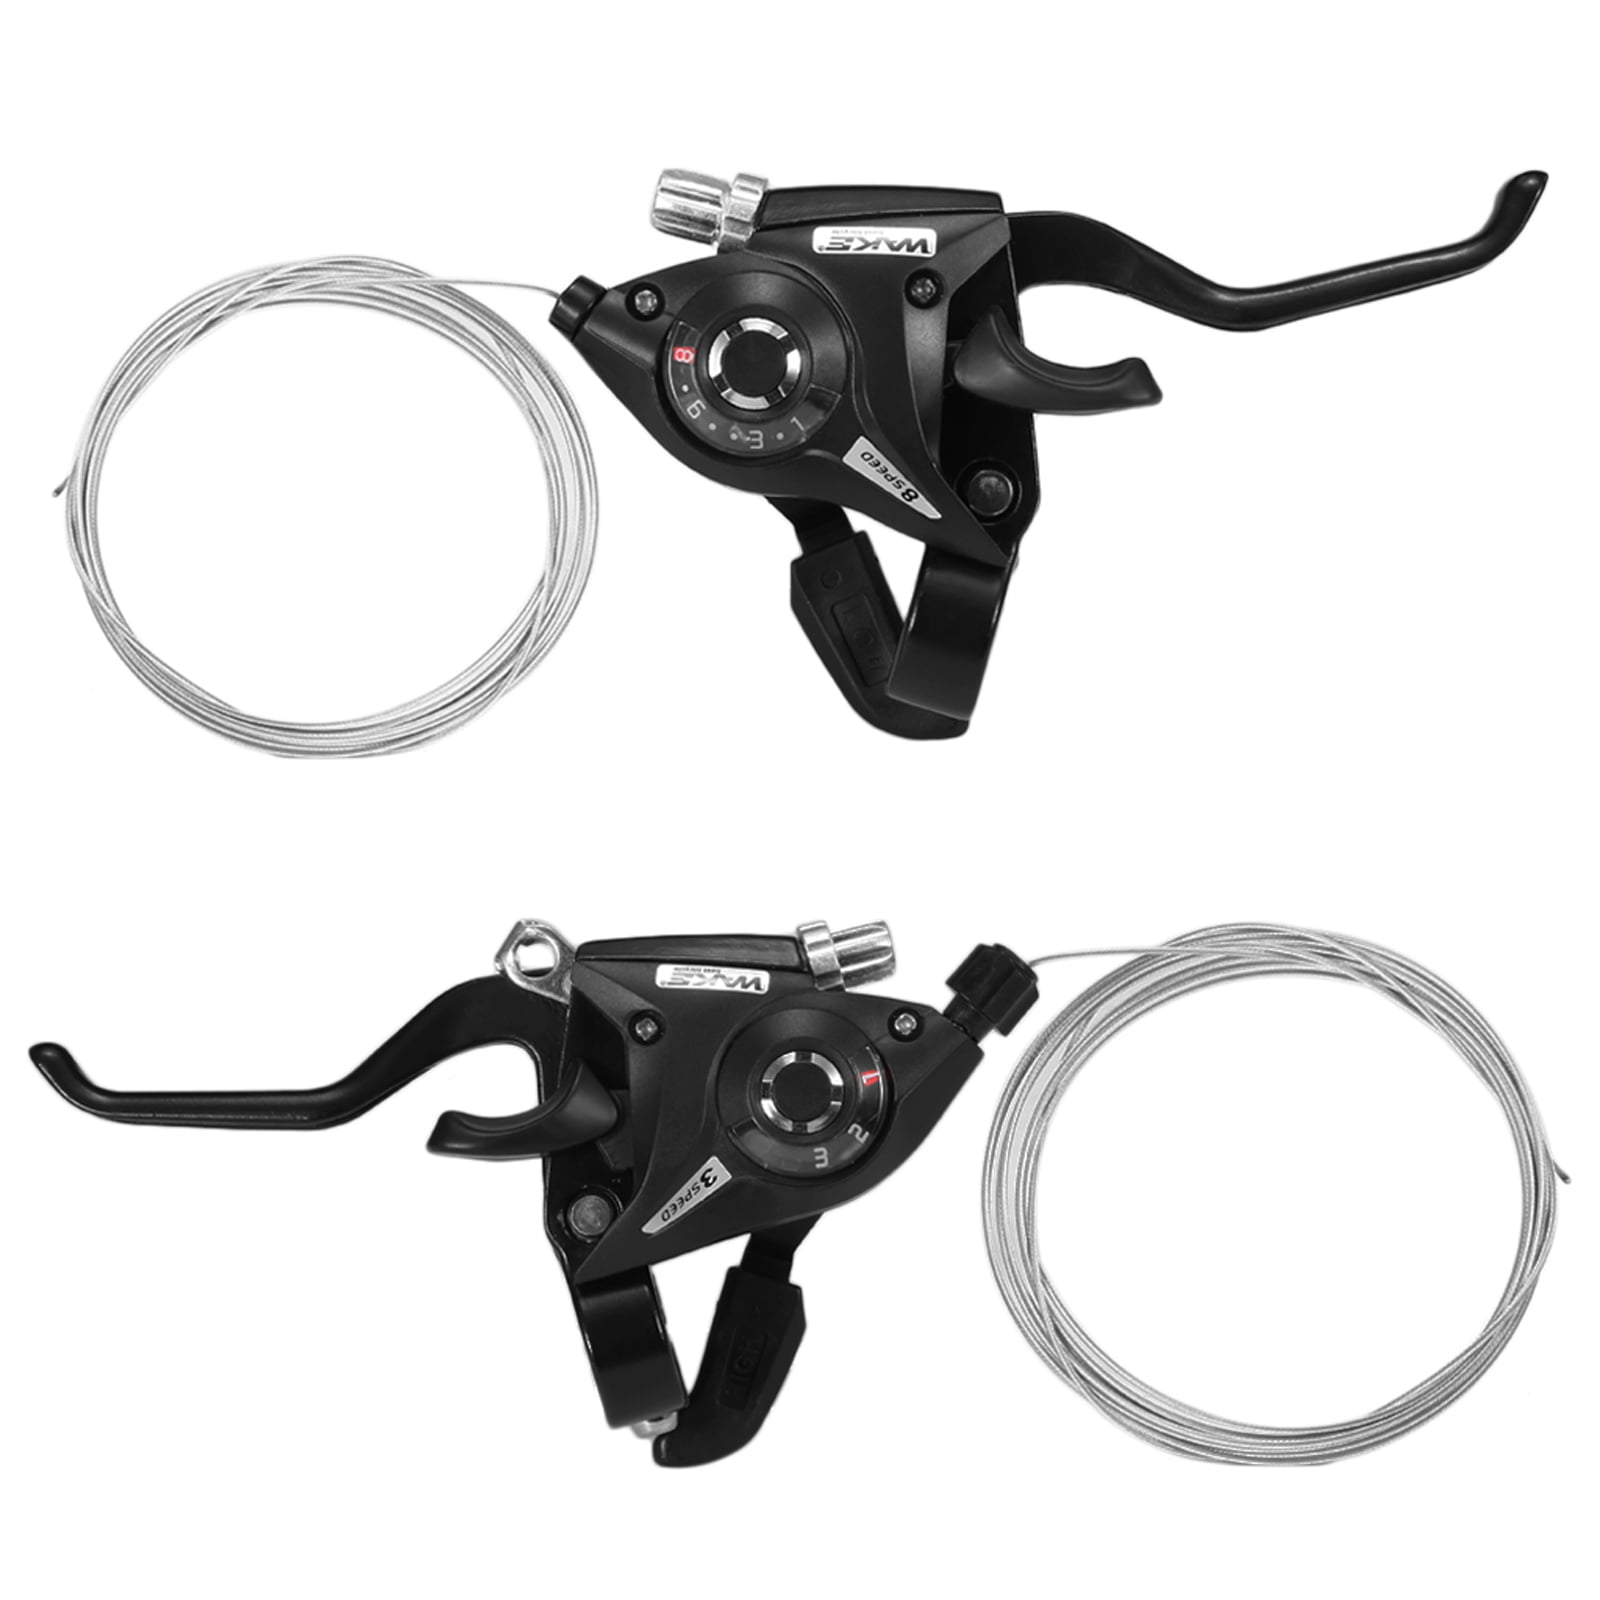 Pair Easy Reach Alloy Bike Cycle V Brake Levers To Suit Twist Grip Type Shifters 